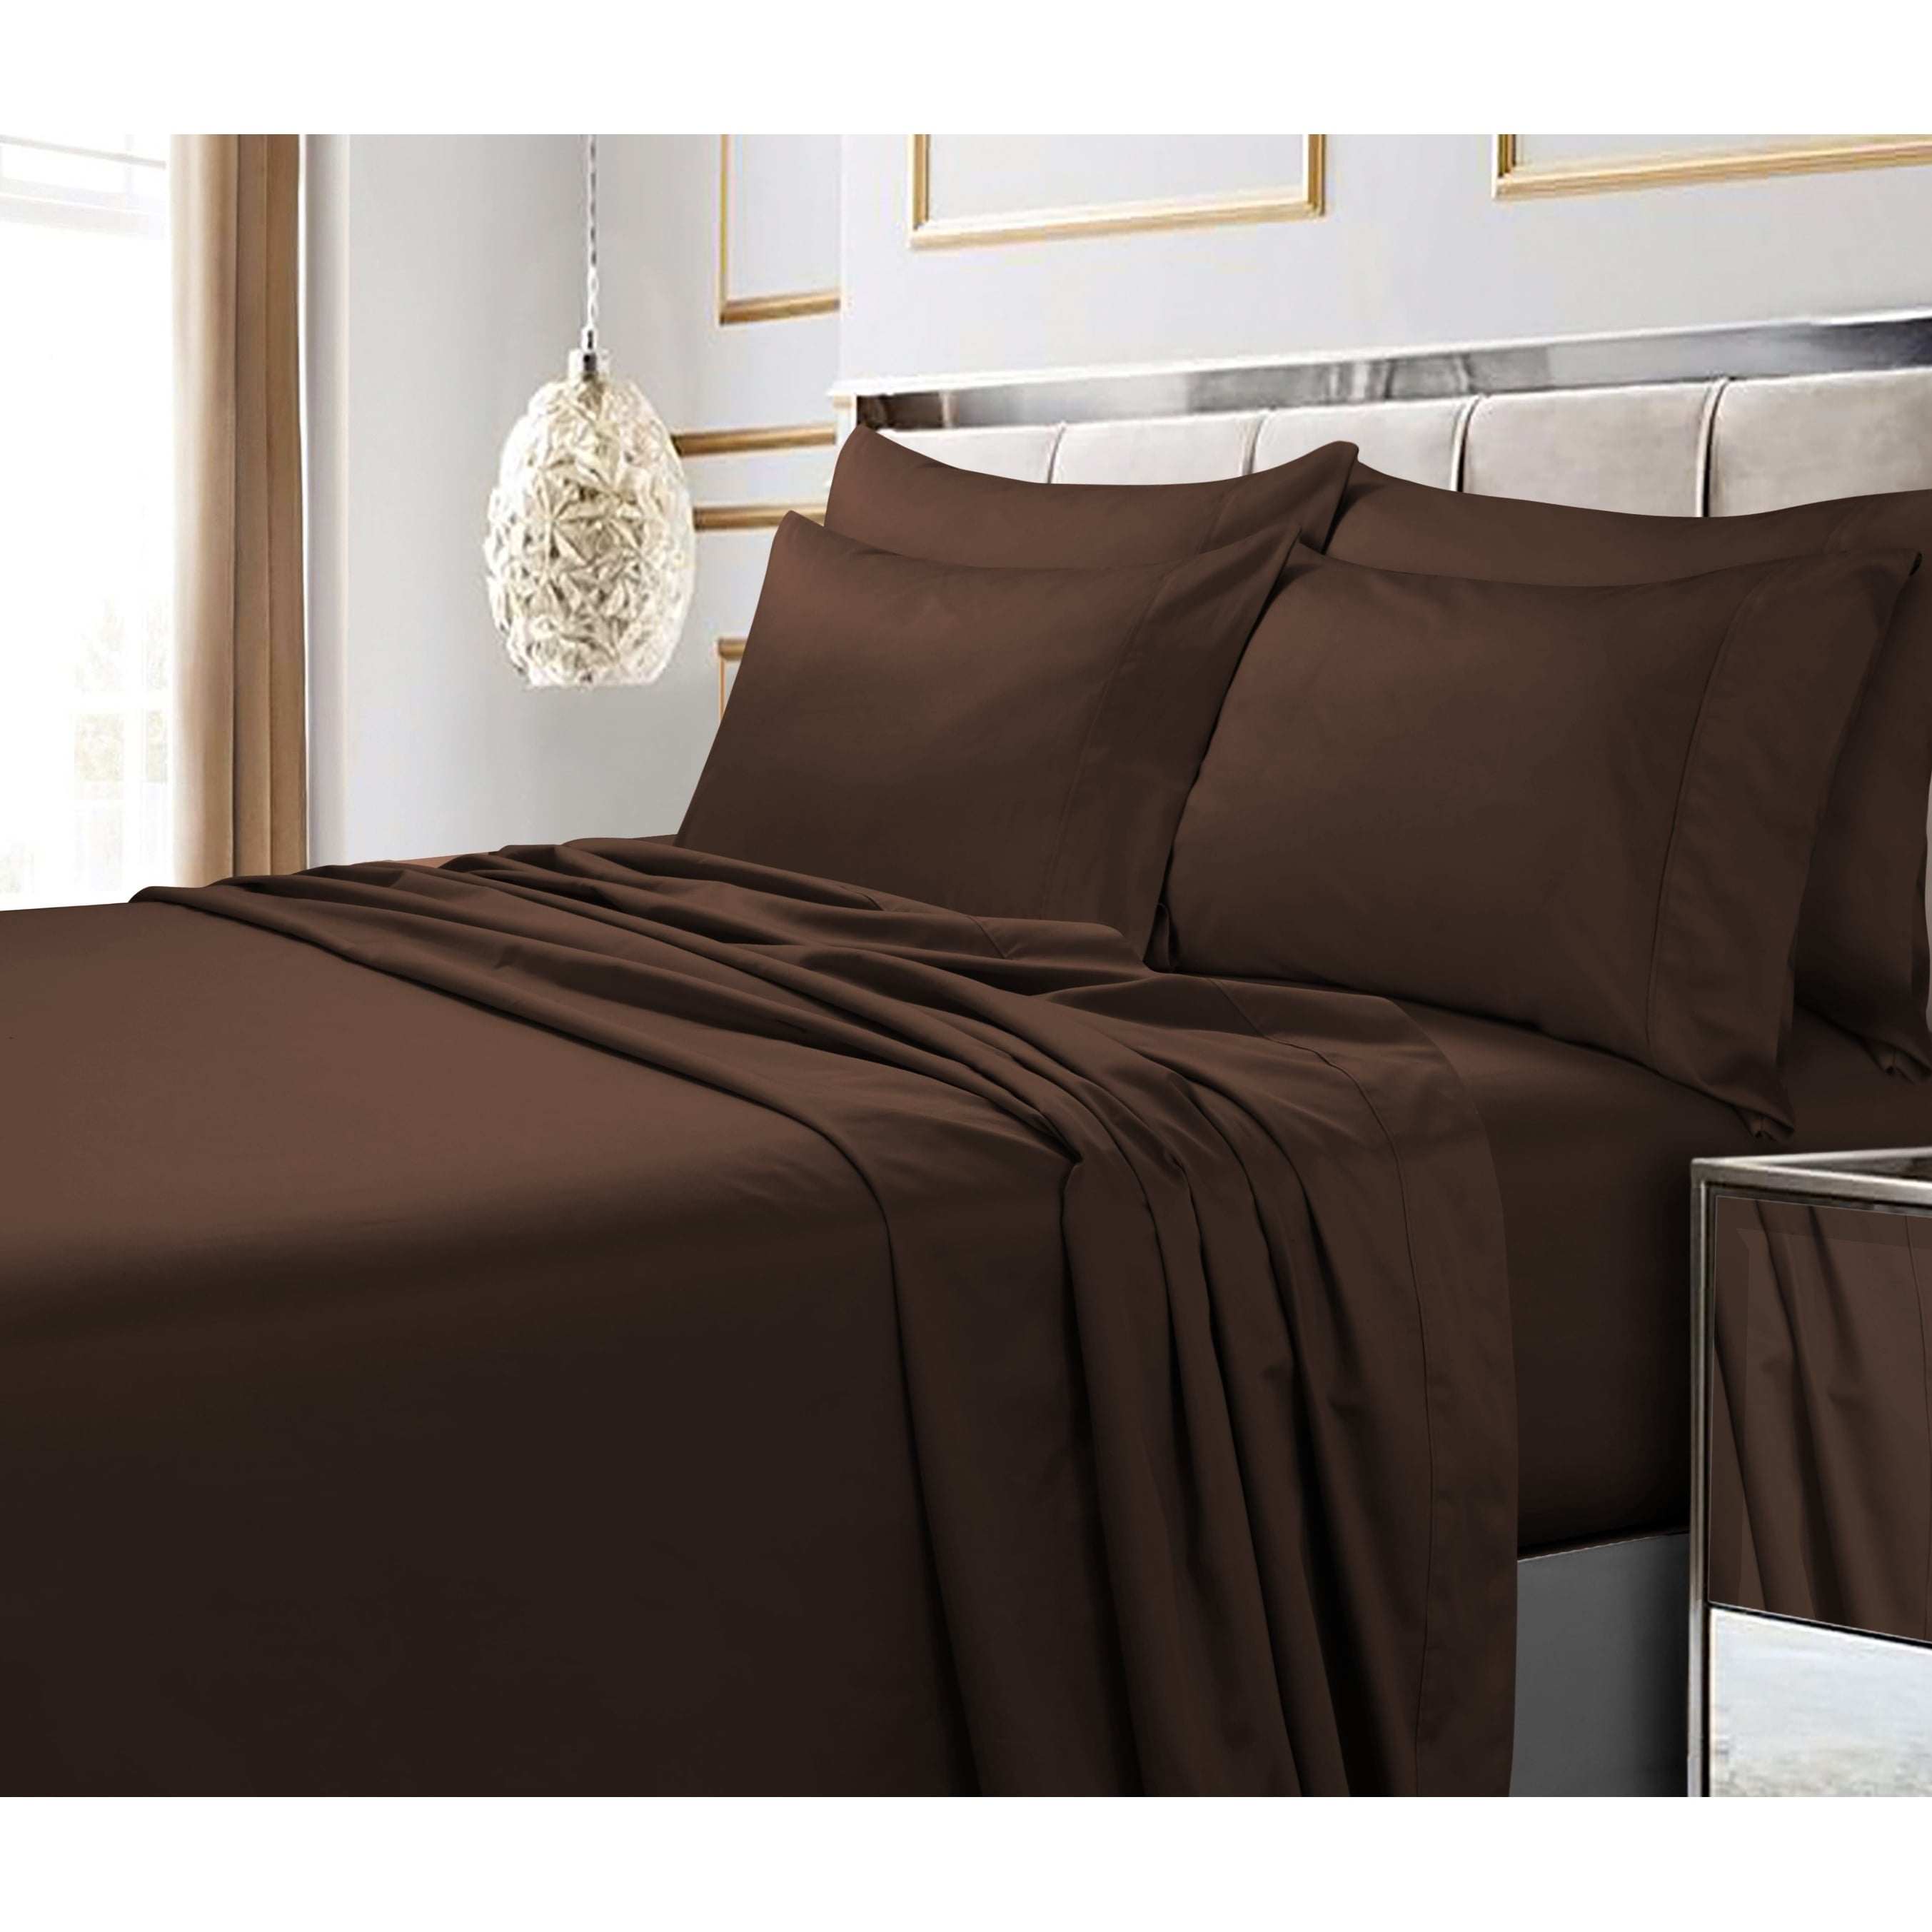 BRANDED BEDDING~ITEM 100% Egyptian Cotton 600 TC USA Sizes Chocolate Solid** 